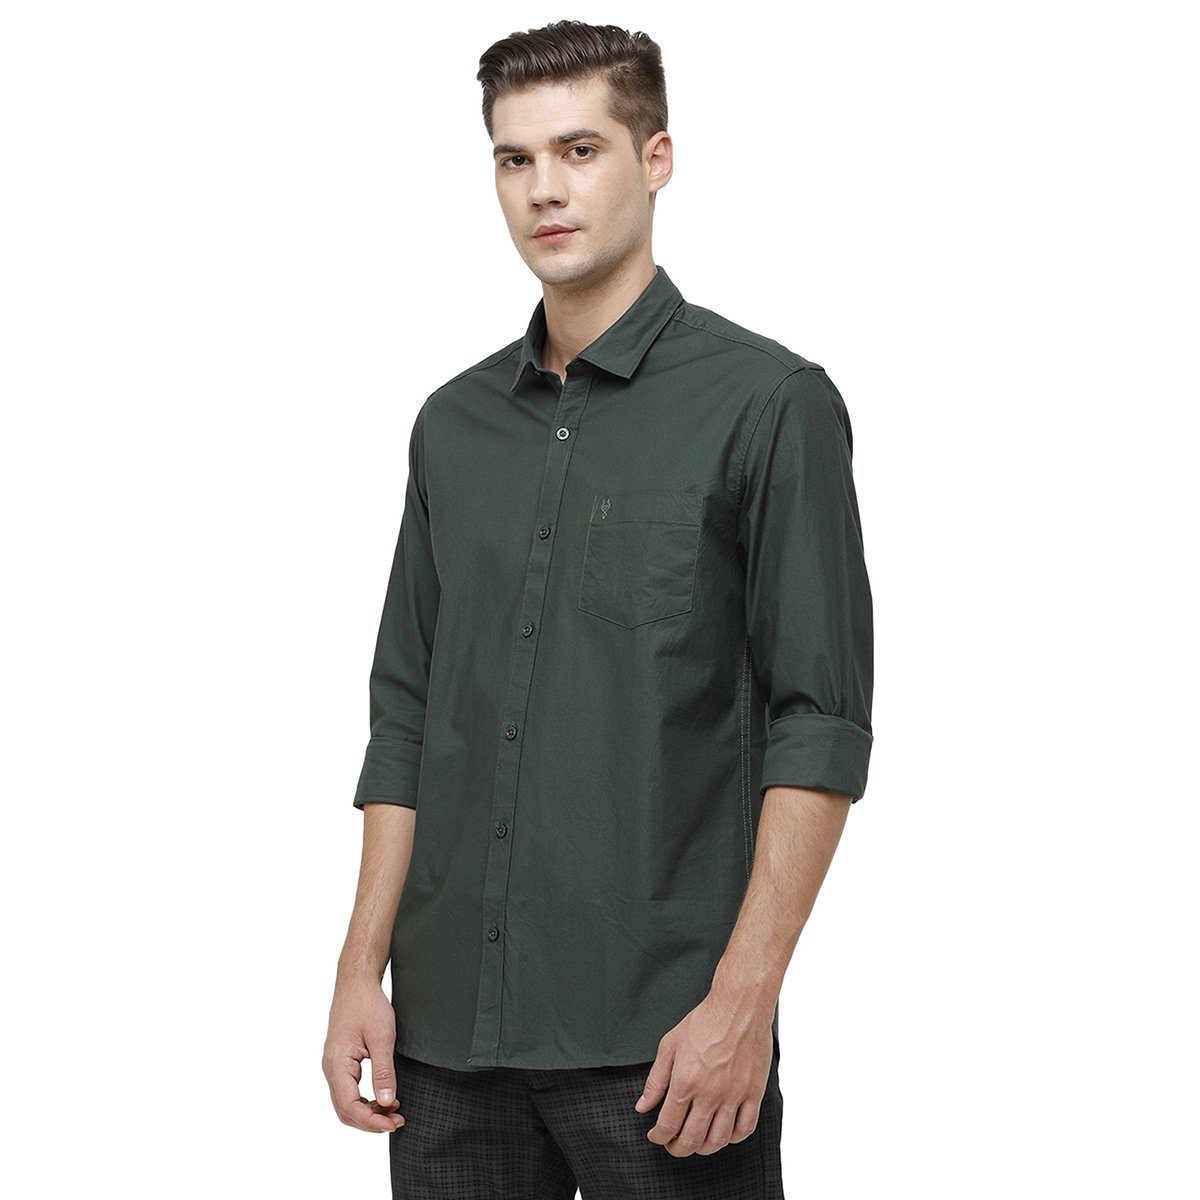 Classic Polo Mens Collar Neck Full Sleeve Bottle Green Smart Fit 100% Cotton Woven Shirt SM1-68 B-FS-SLD-SF Shirts Classic Polo 